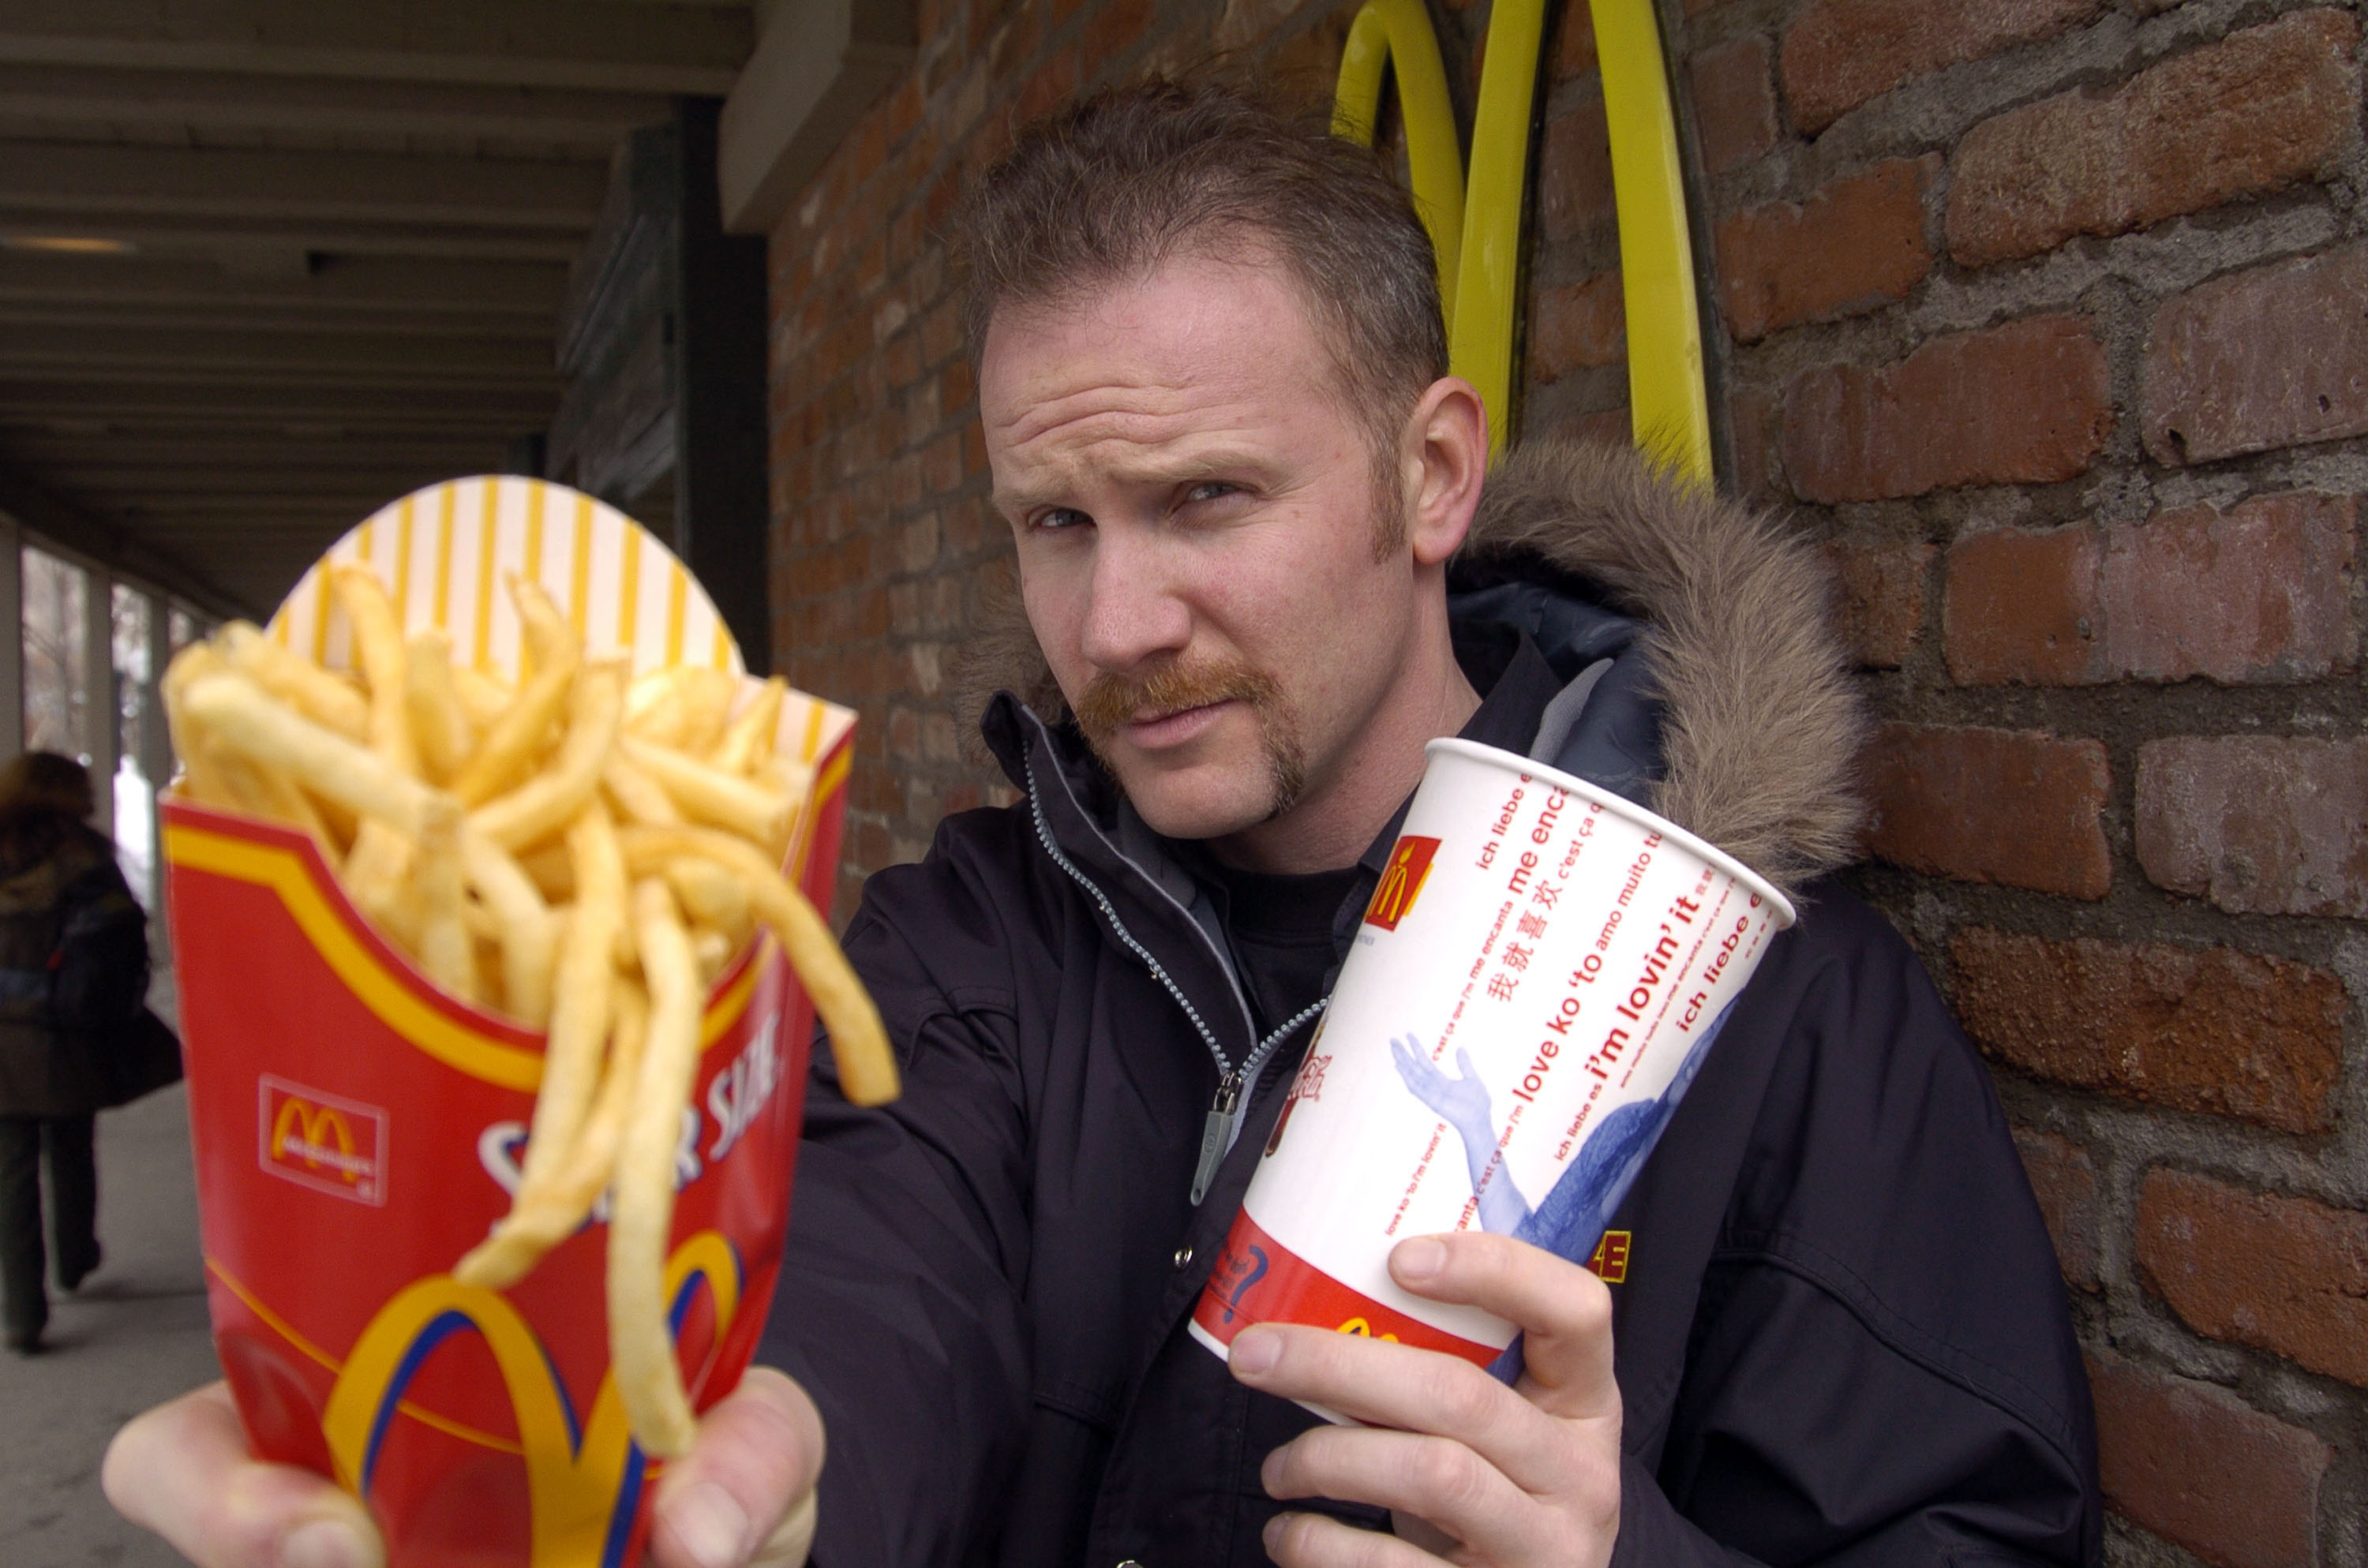 A man in a mustache holds McDonald’s food